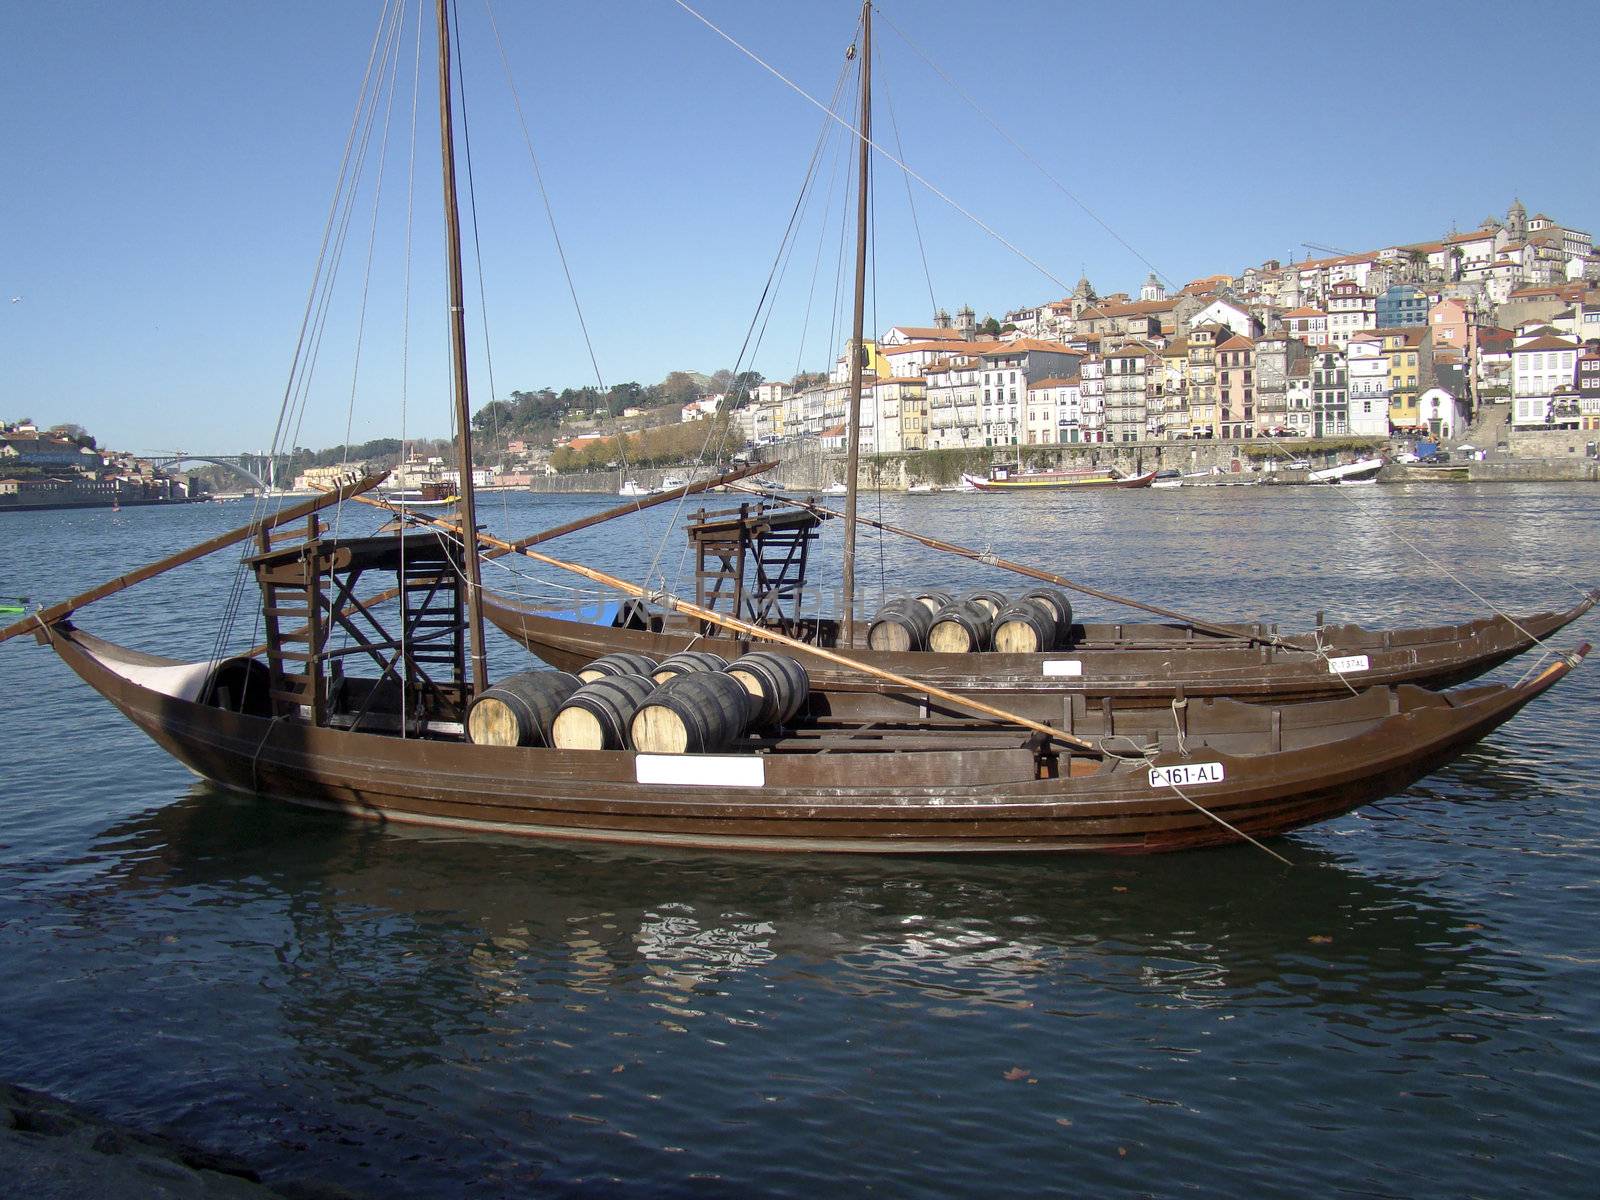 Ancient Boat in Oporto, in which was used to transport the Port Wine in the river crossing 